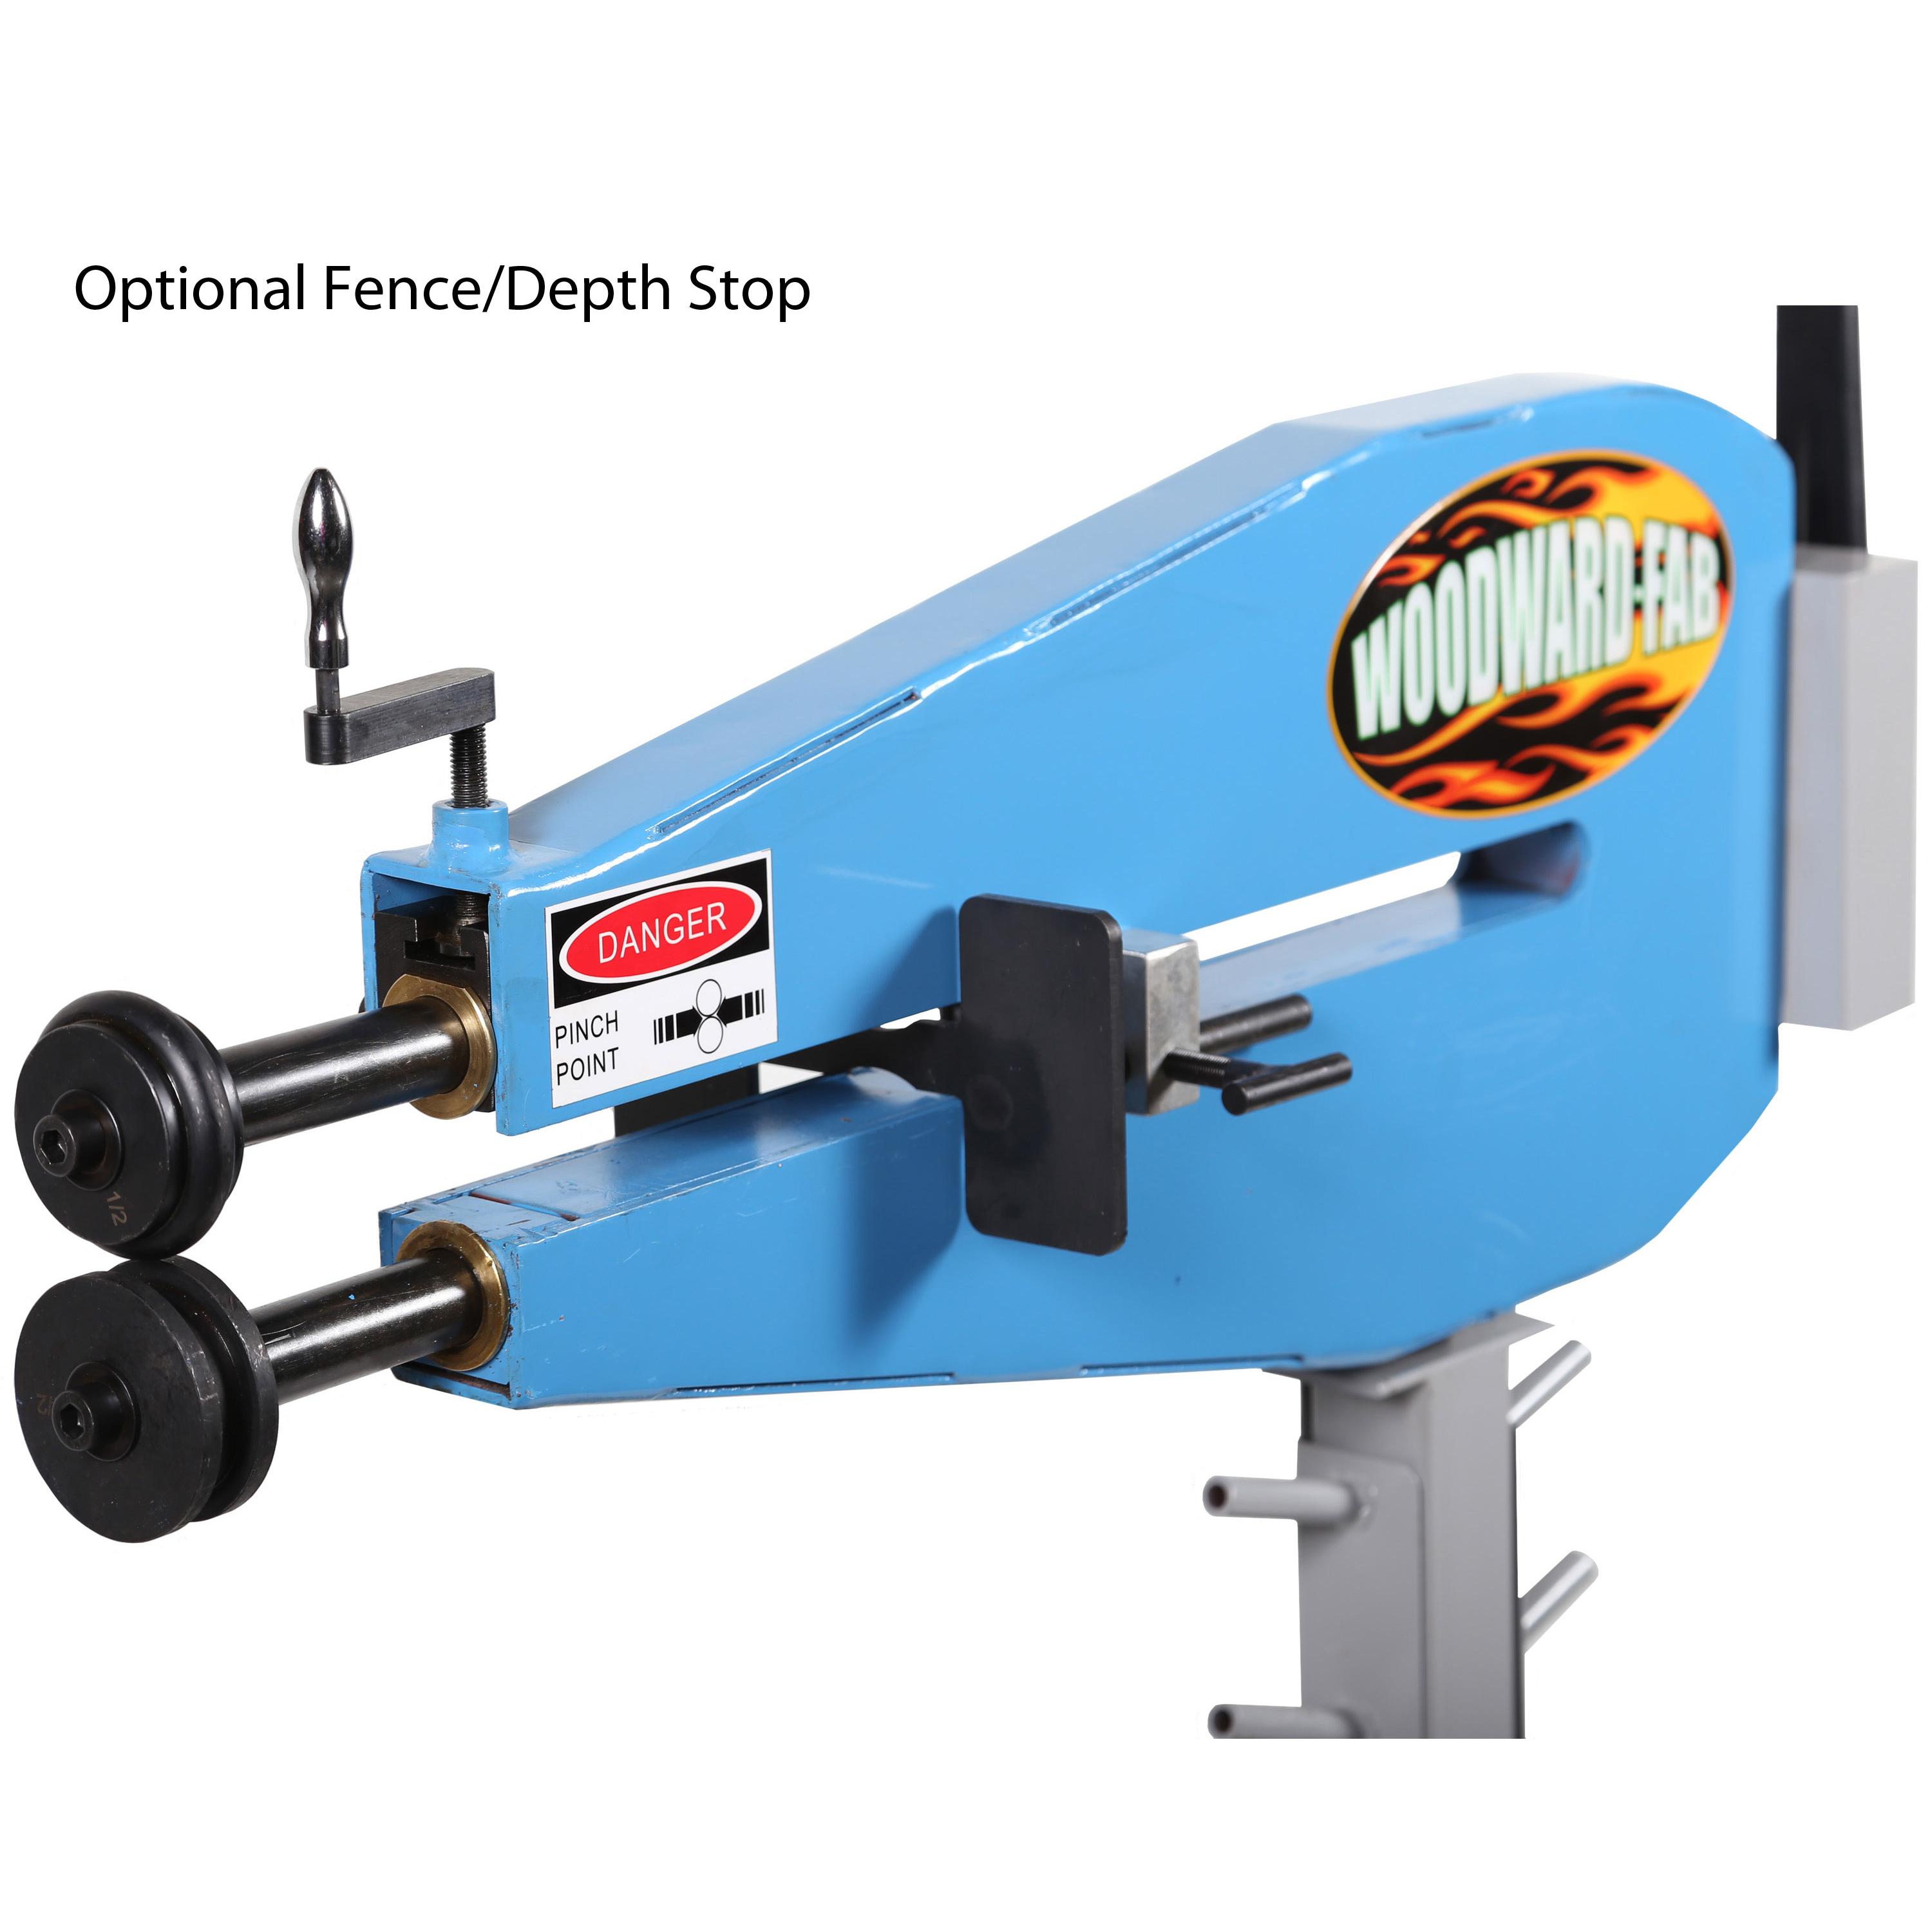 Woodward Fab Round Bead Roller Die : Motorcycle Lift Tables, Stands,  Chocks, & Trailers, Plus Automotive 2 & 4 Post Lifts - FREE SHIPPING - FREE  SHIPPING FOR ~ 500 MILES